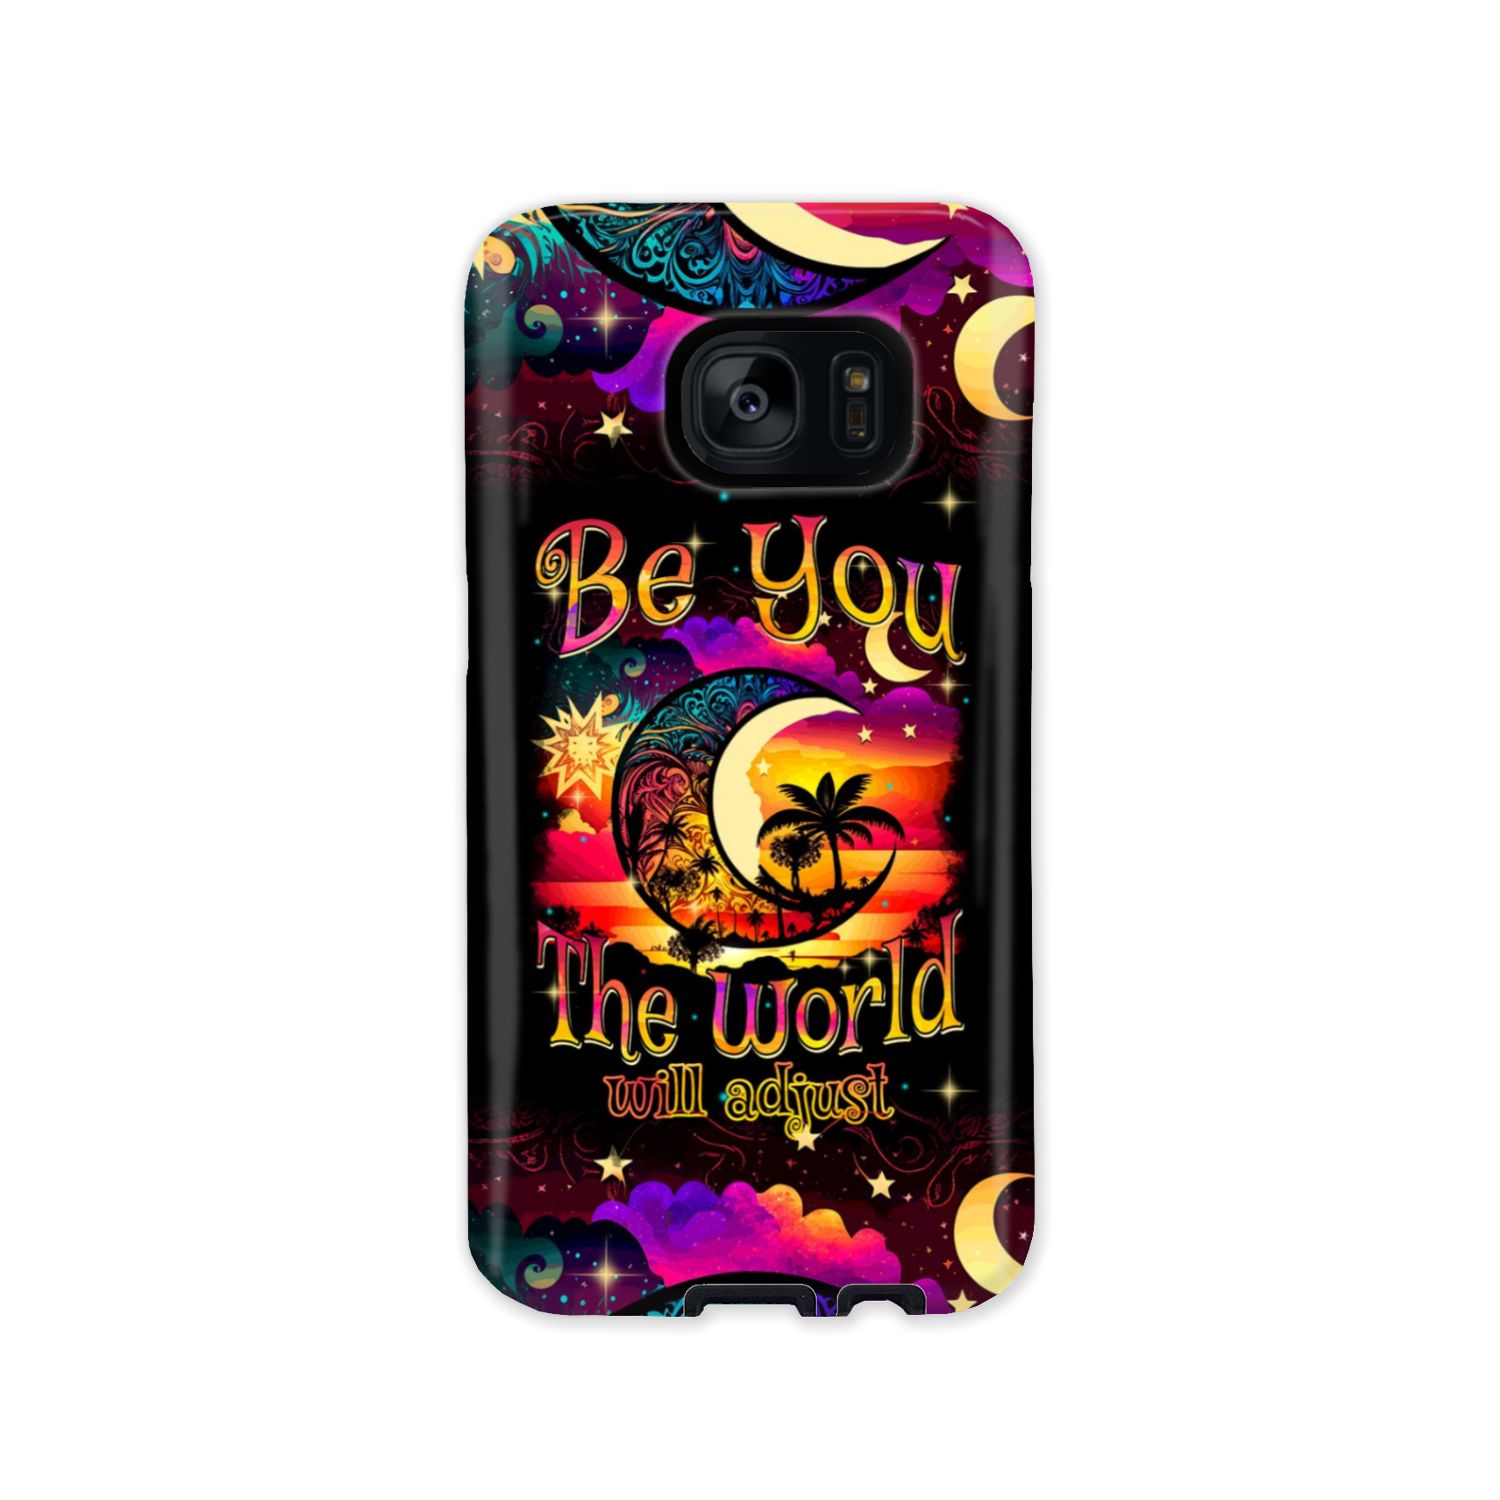 BE YOU THE WORLD WILL ADJUST PHONE CASE - TYTM0304237